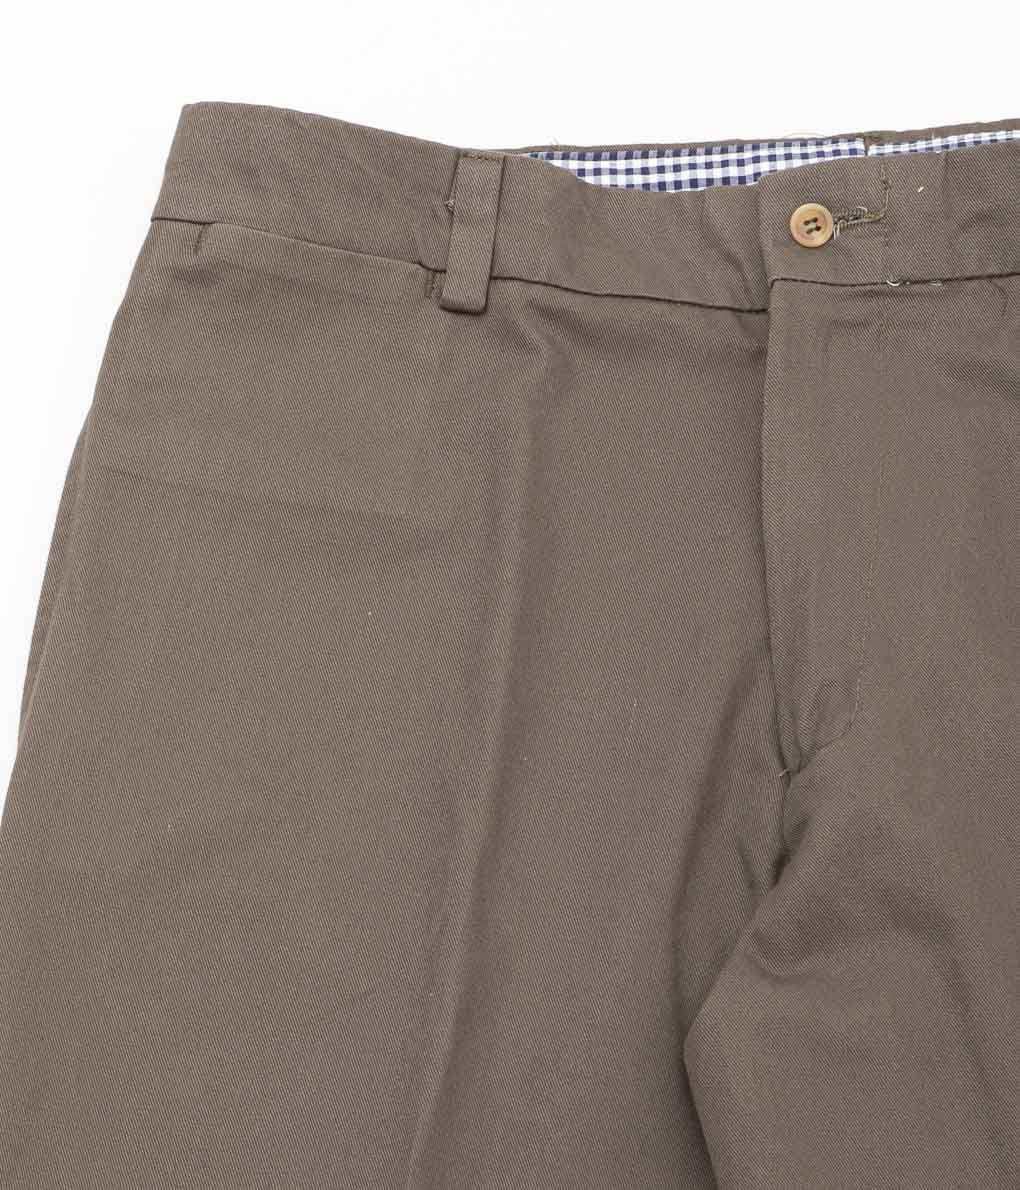 ALL AMERICAN KHAKIS "CRAMERTON TWILL(RELAXED FIT)"(OLIVE)